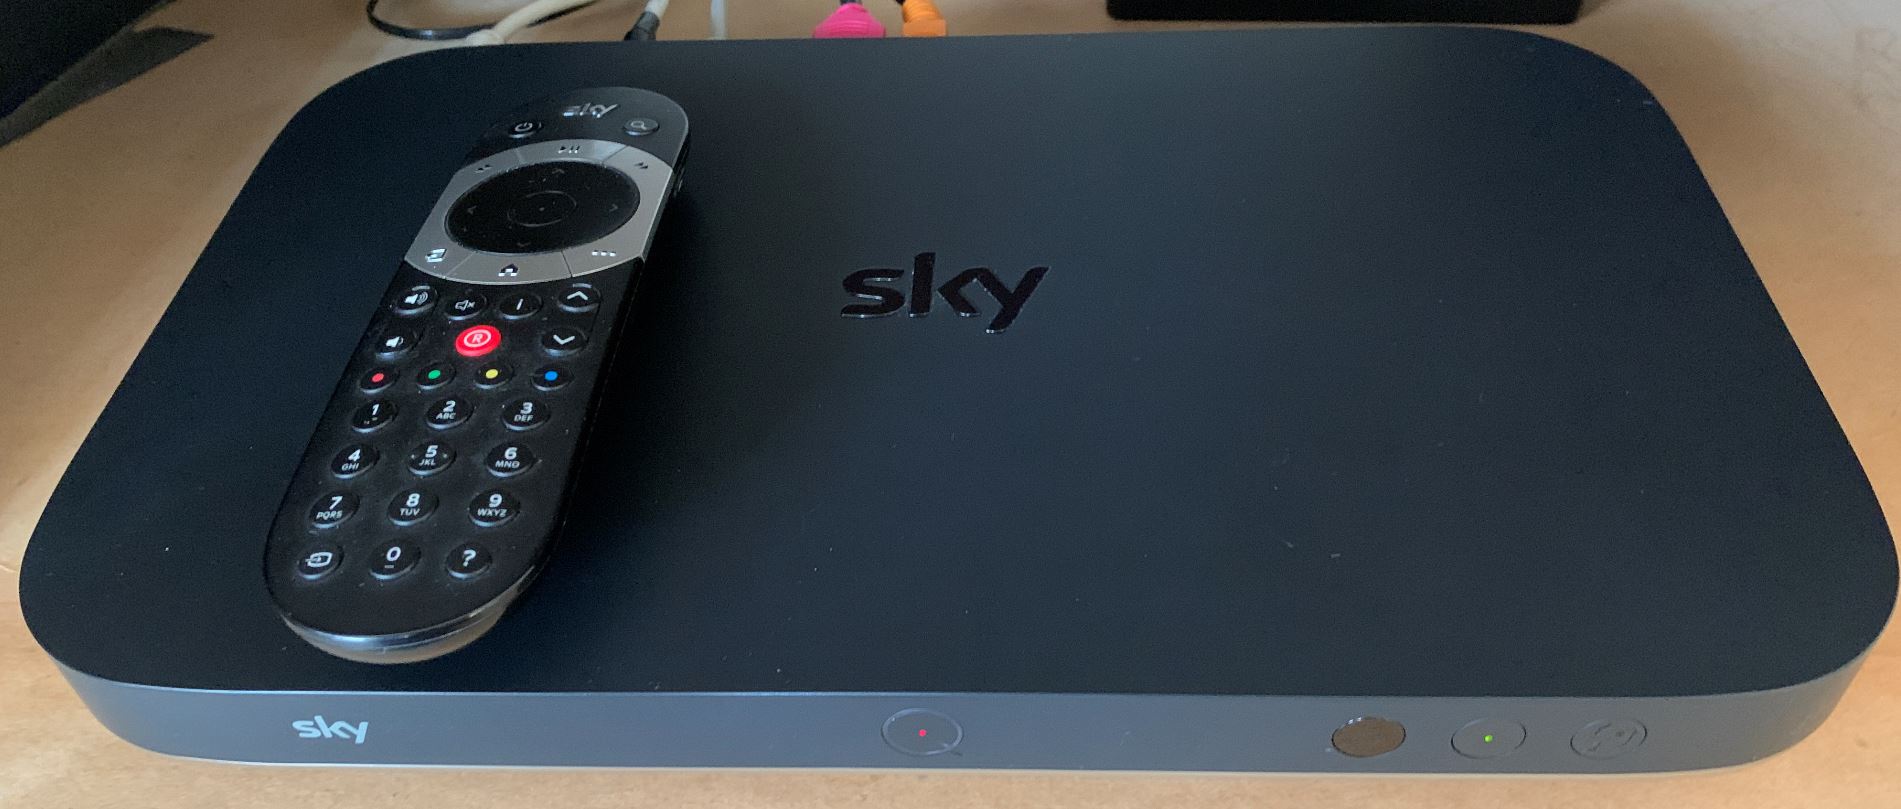 How To Get Subtitles on Sky q